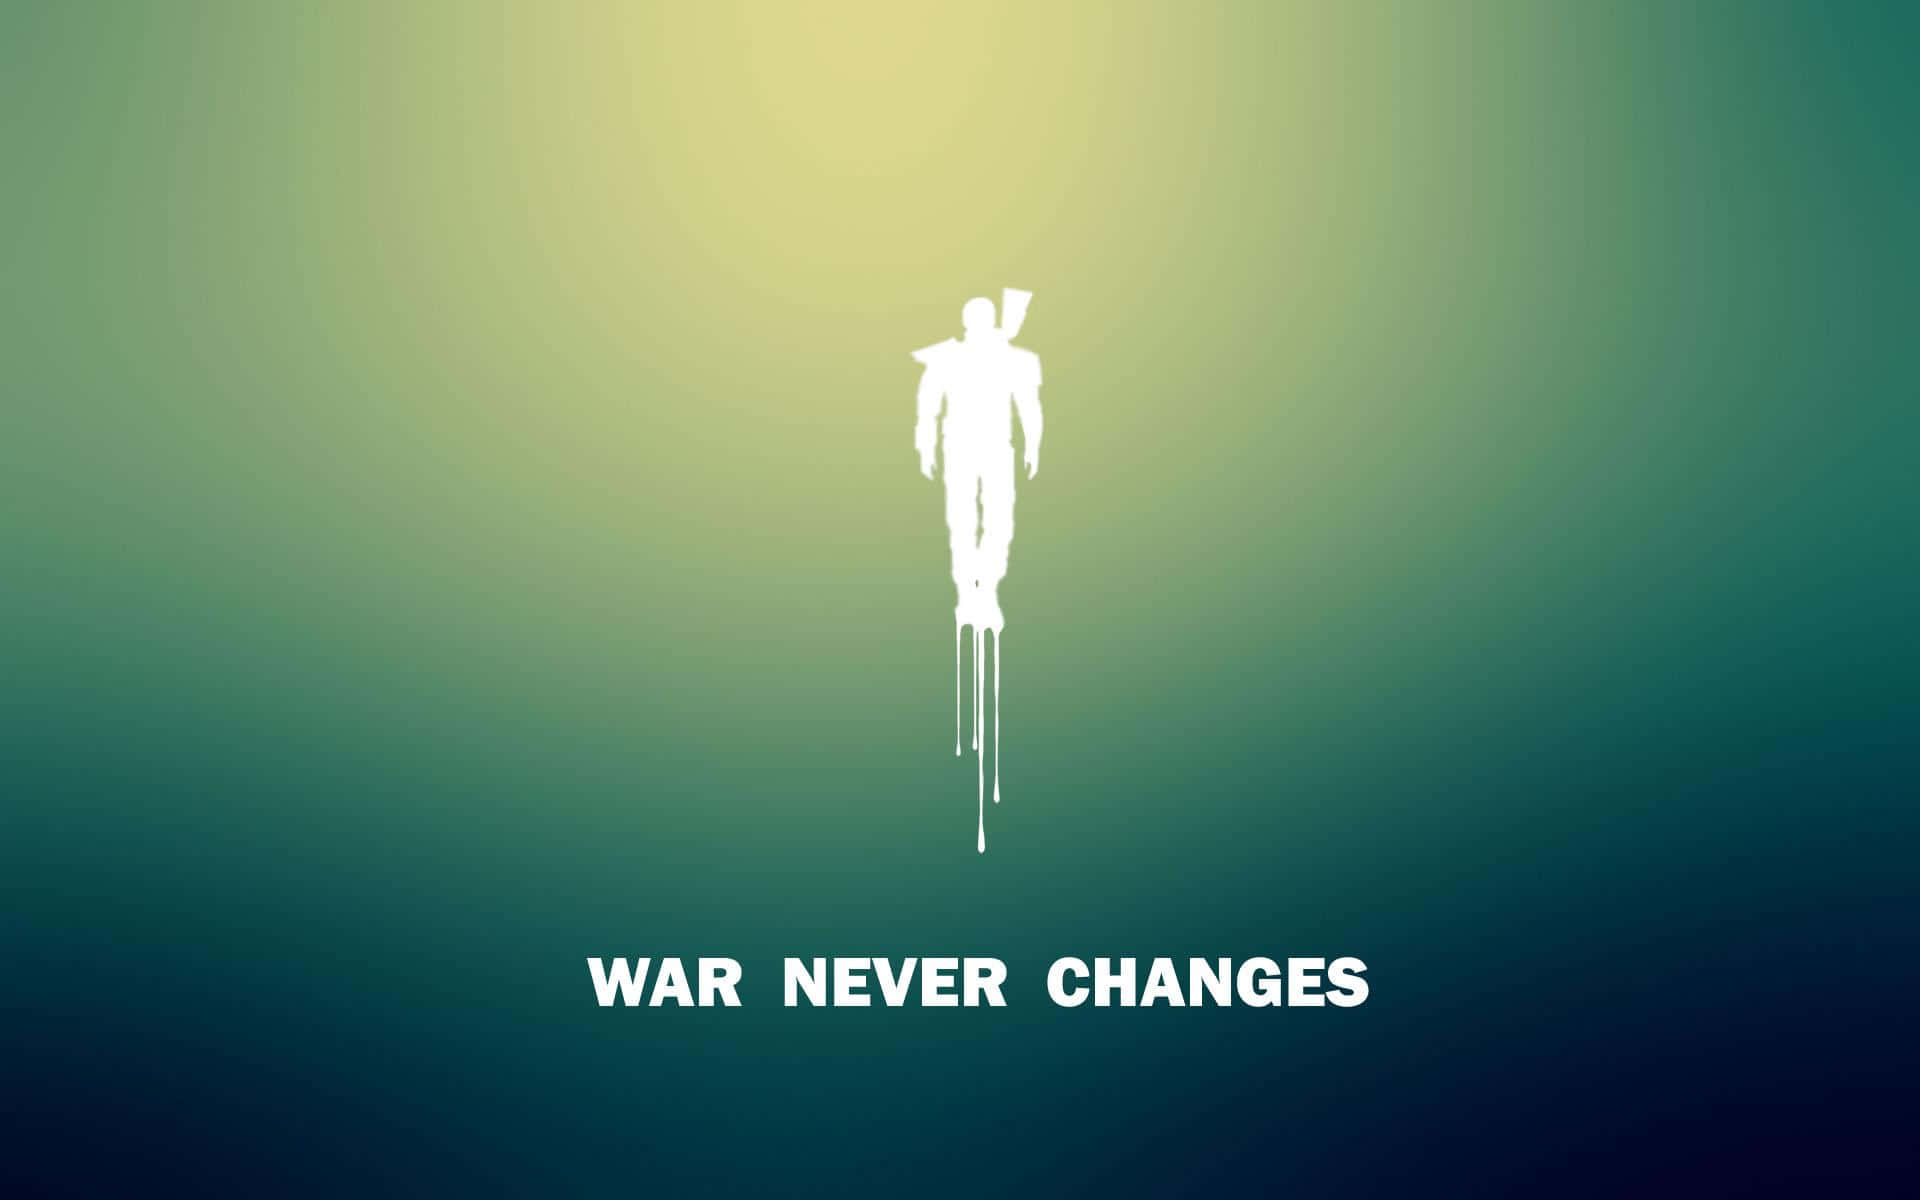 War Never Changes - A Minimalistic Poster Wallpaper